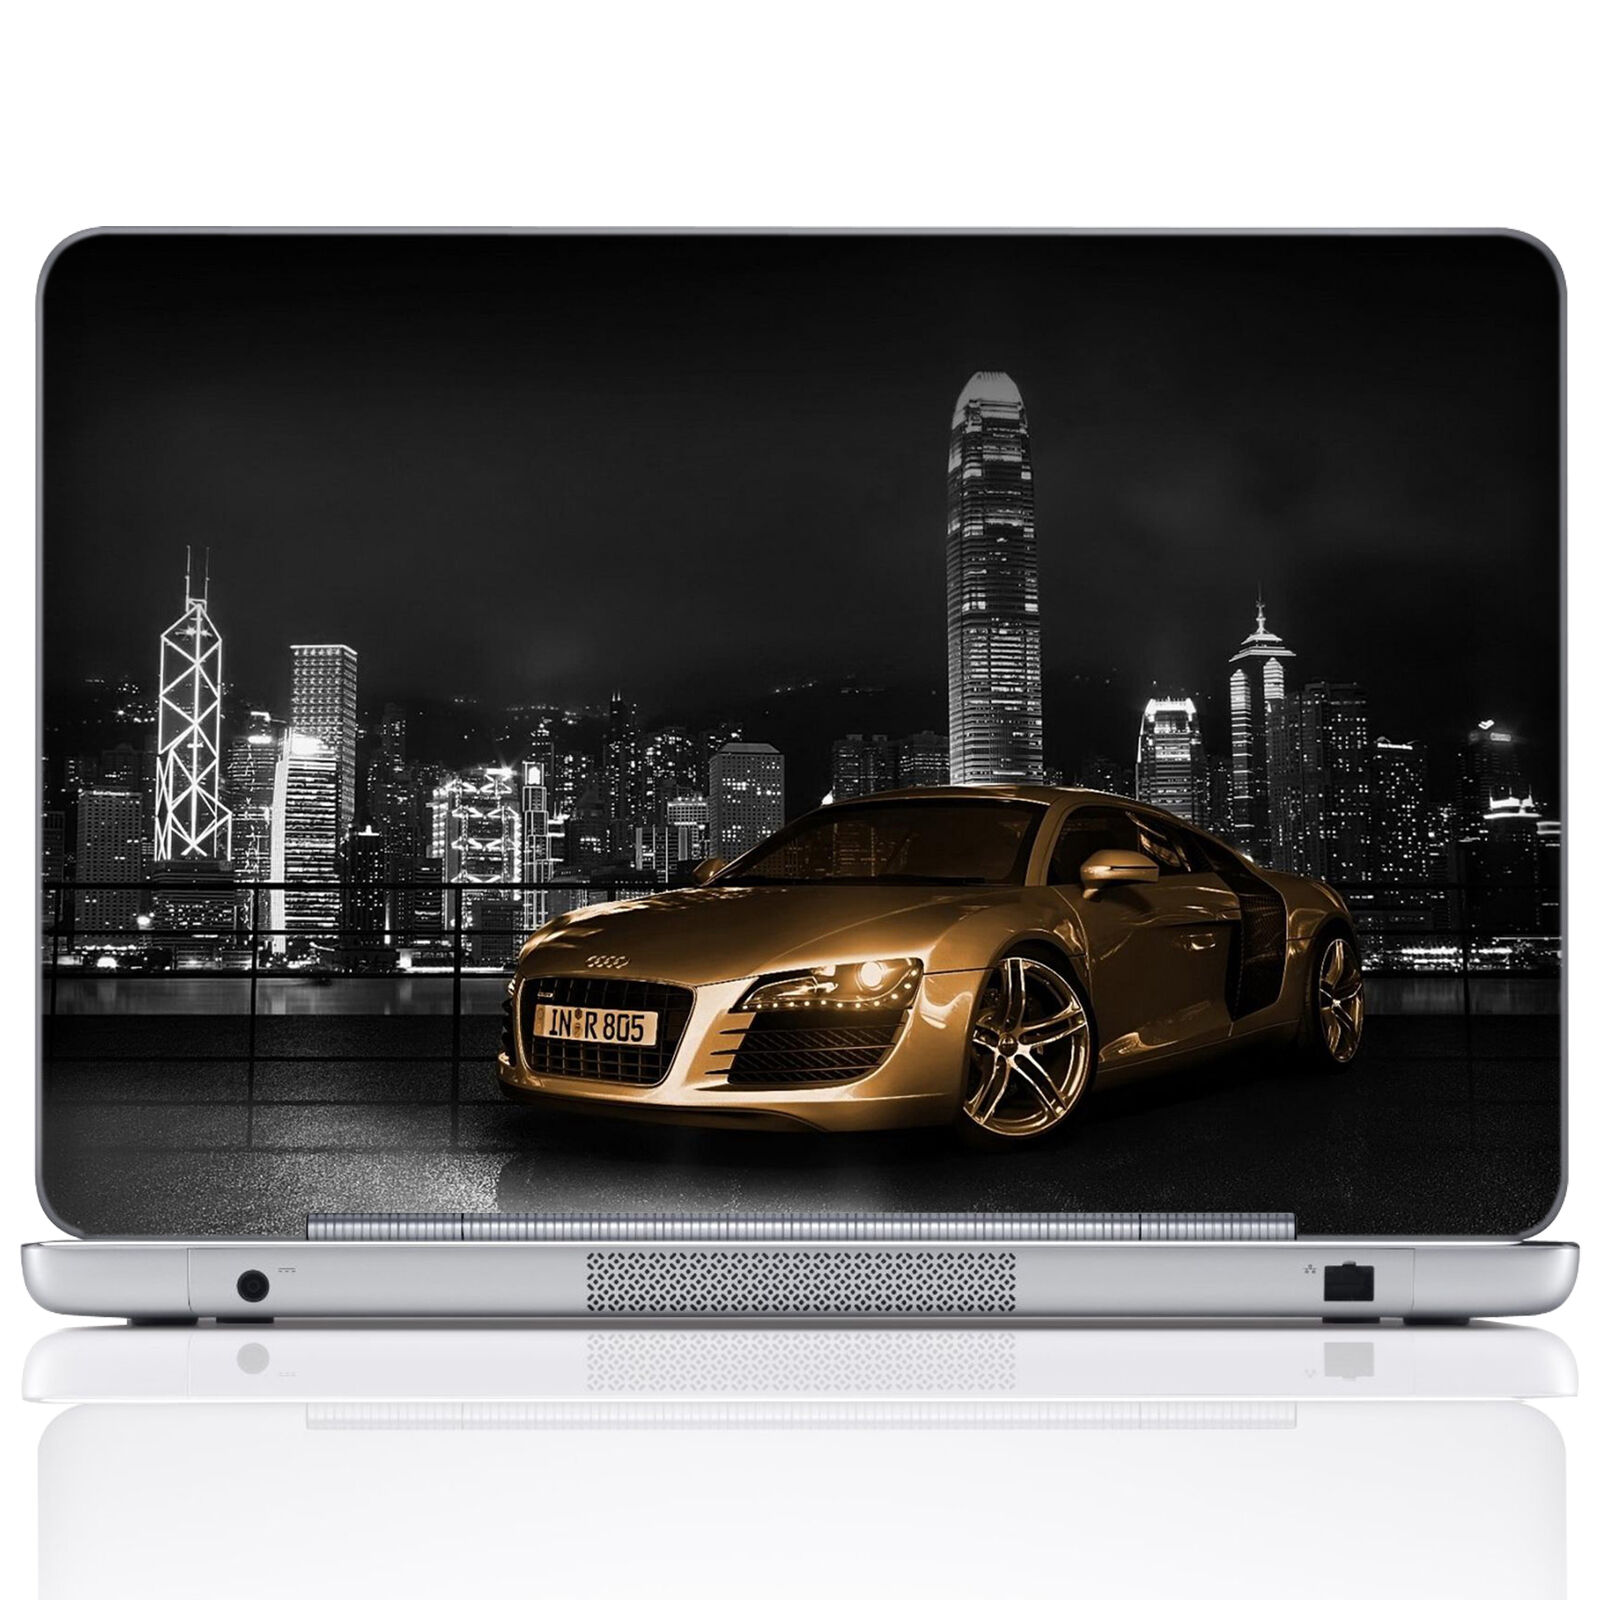 10 to 17 inch Laptop Computer Skin Sticker Decal Cover For ASUS DELL HP and more